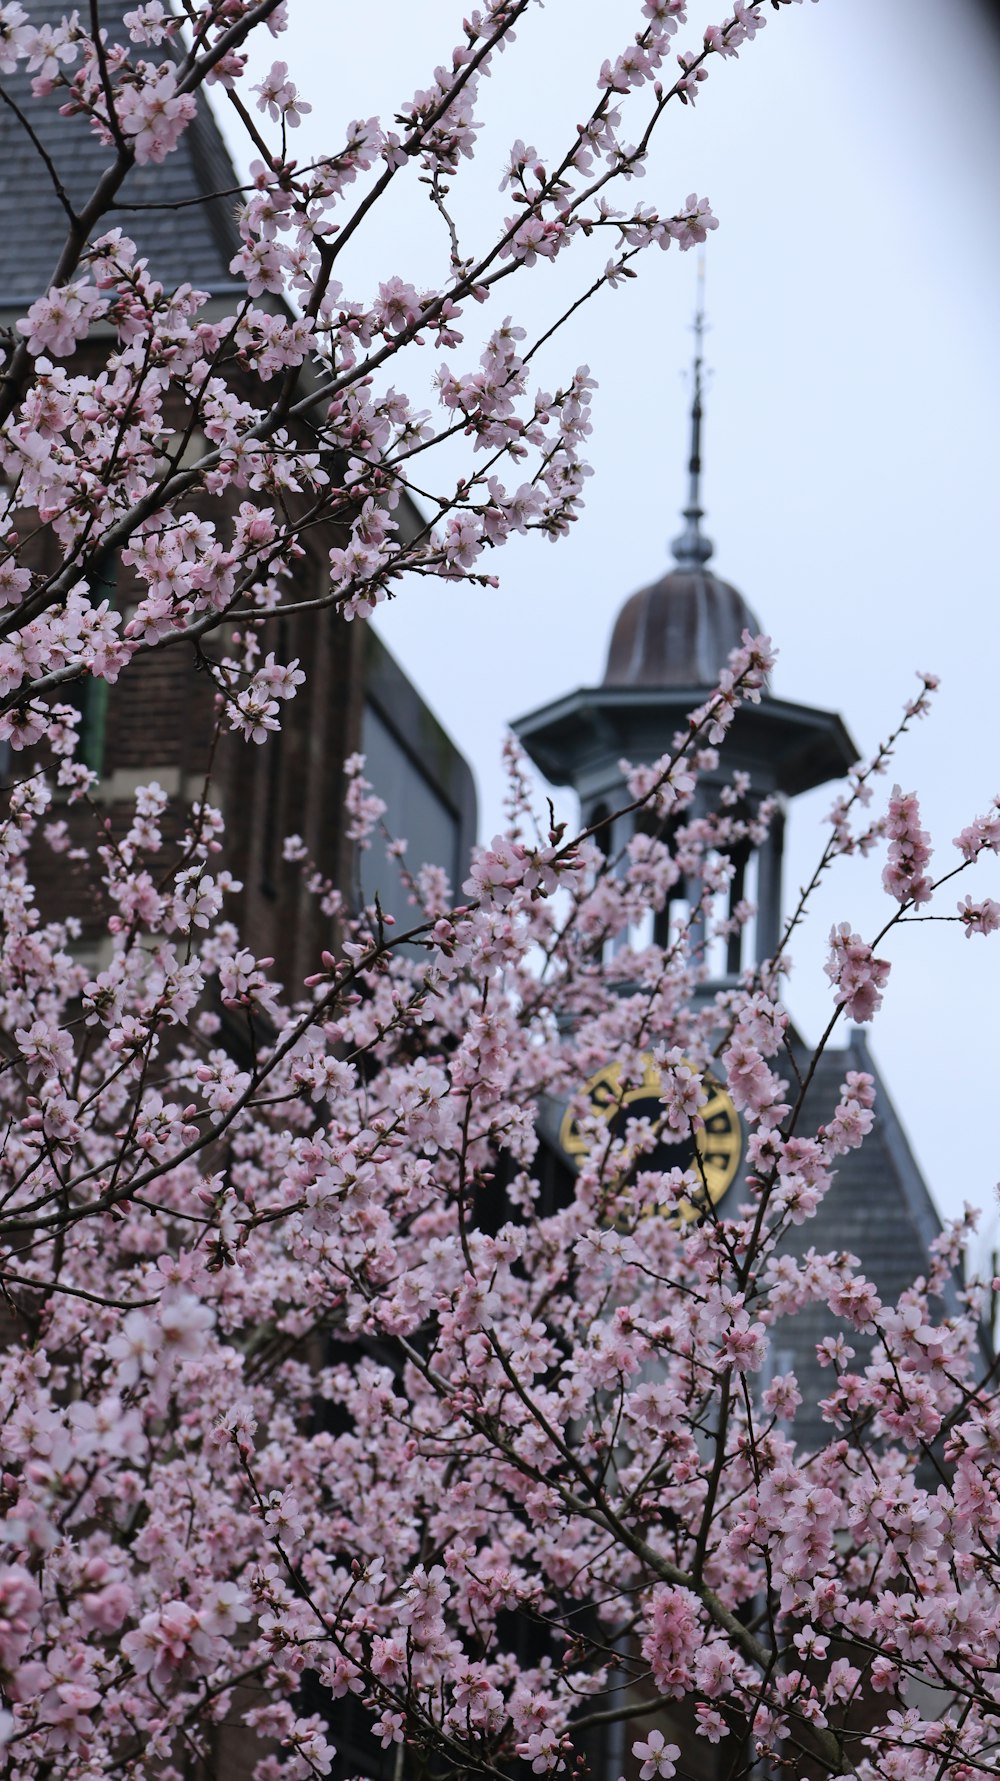 a building with a clock and a tree with pink flowers